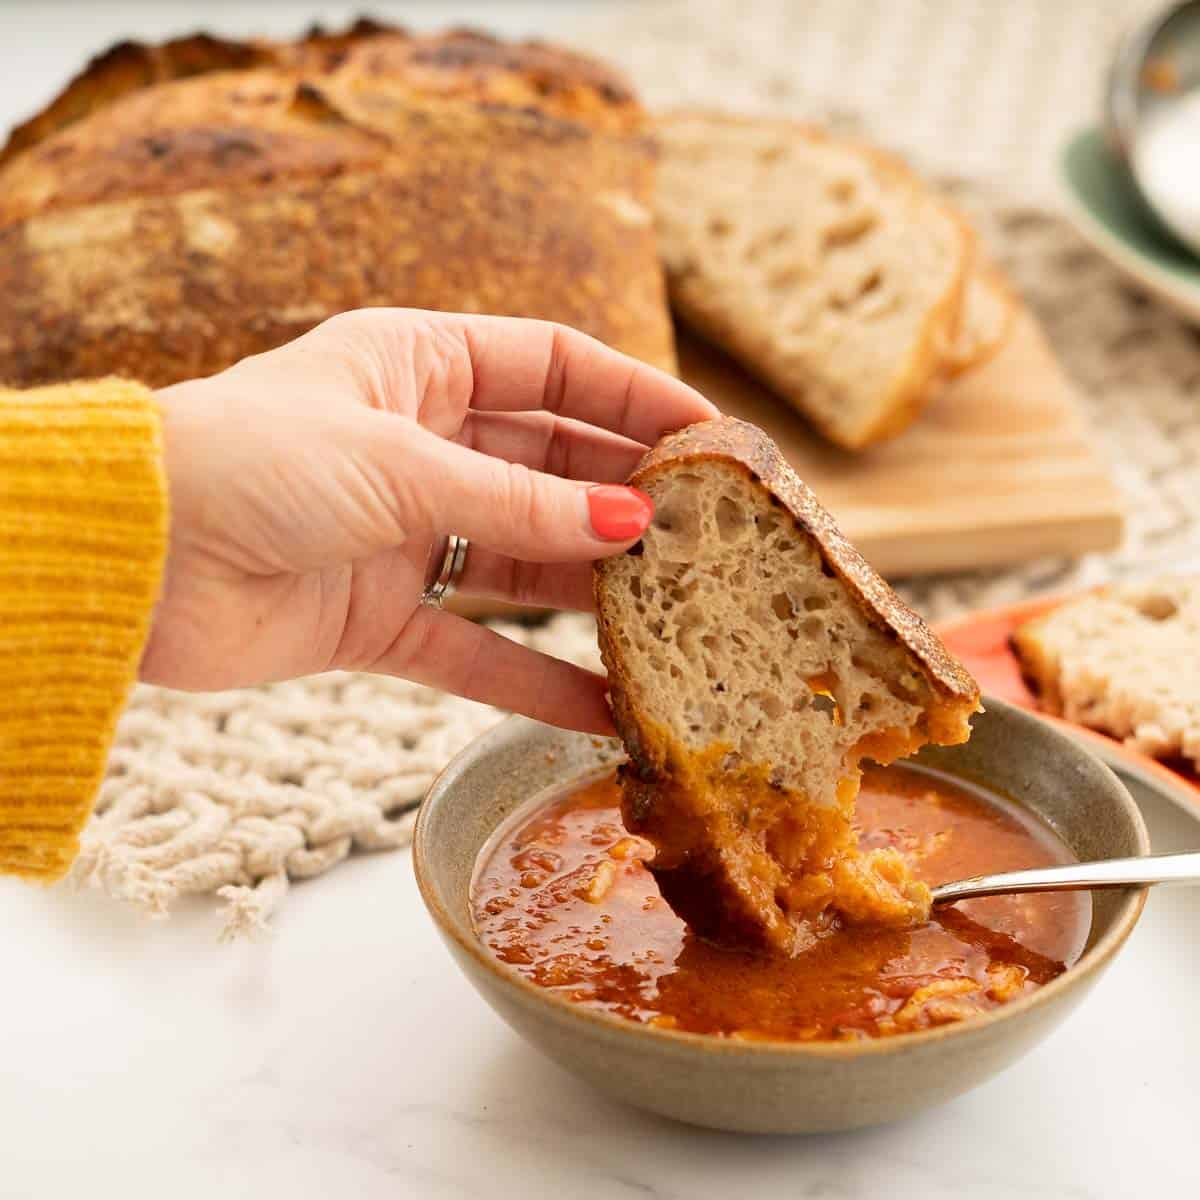 A woman's hand dipping a slice of crusty bread into a bowl of tomato soup.